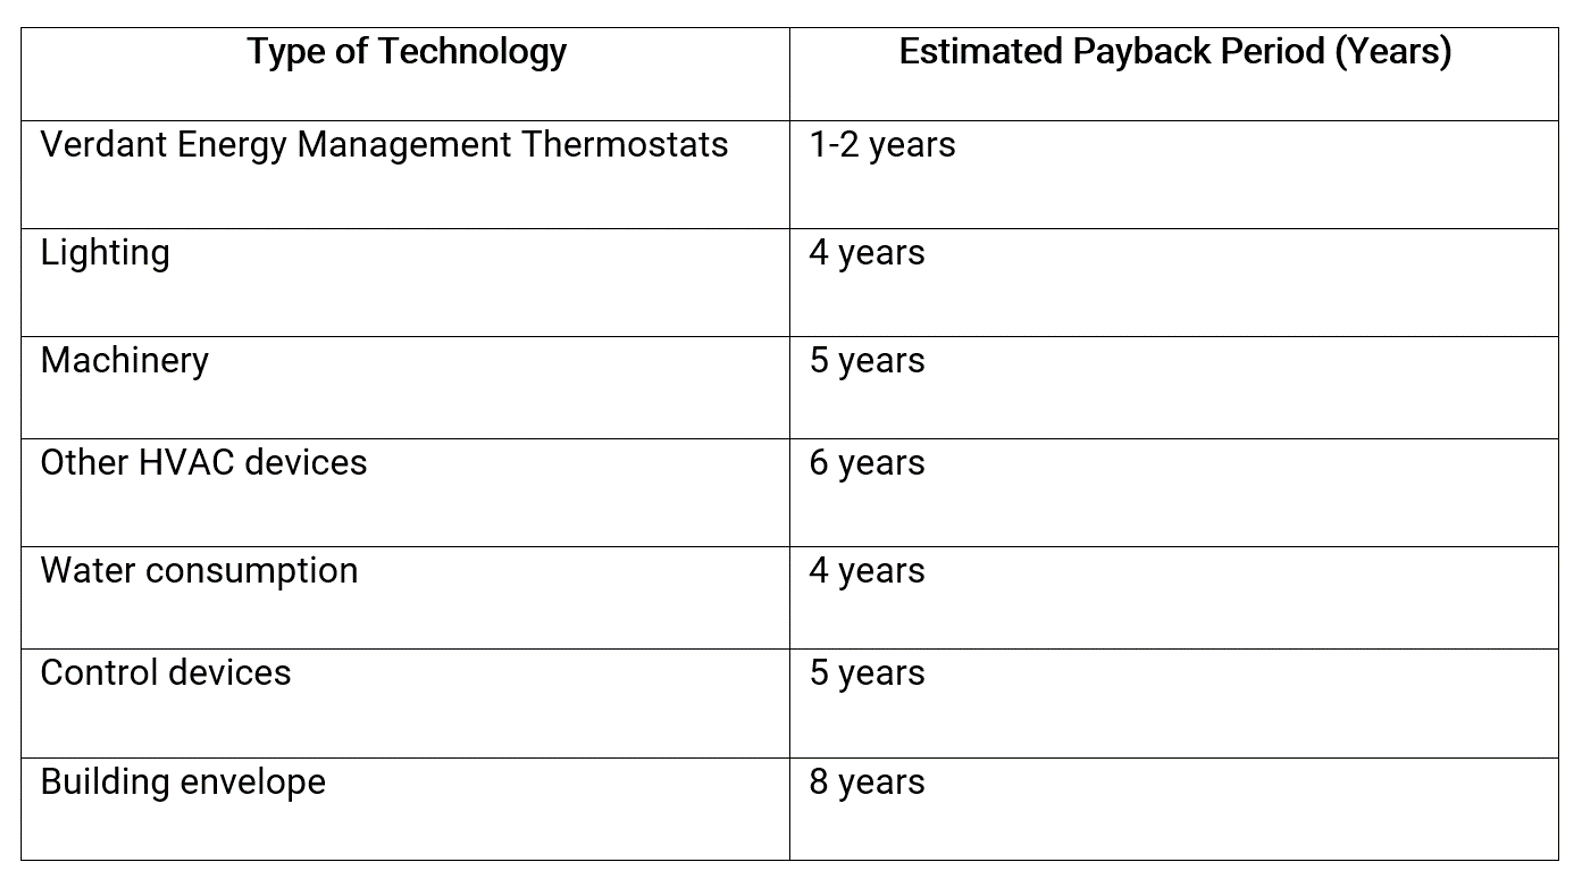 Table of Estimated Technology Payback Period